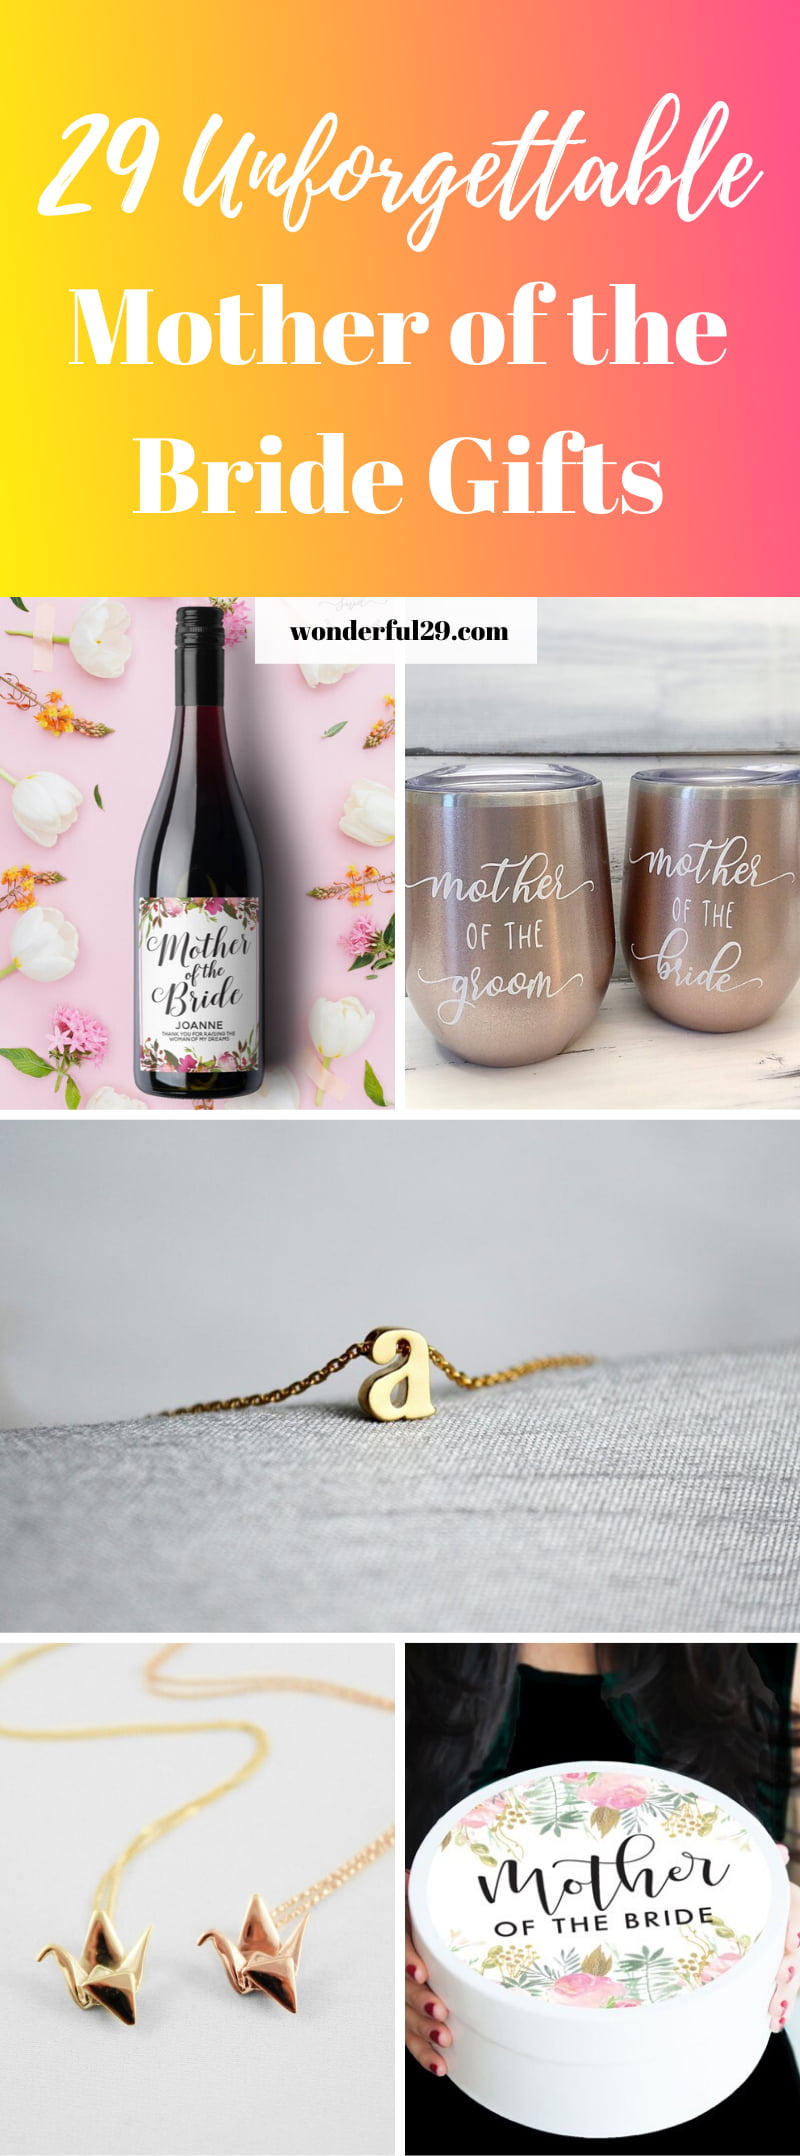 Mother of the Bride Gift Ideas